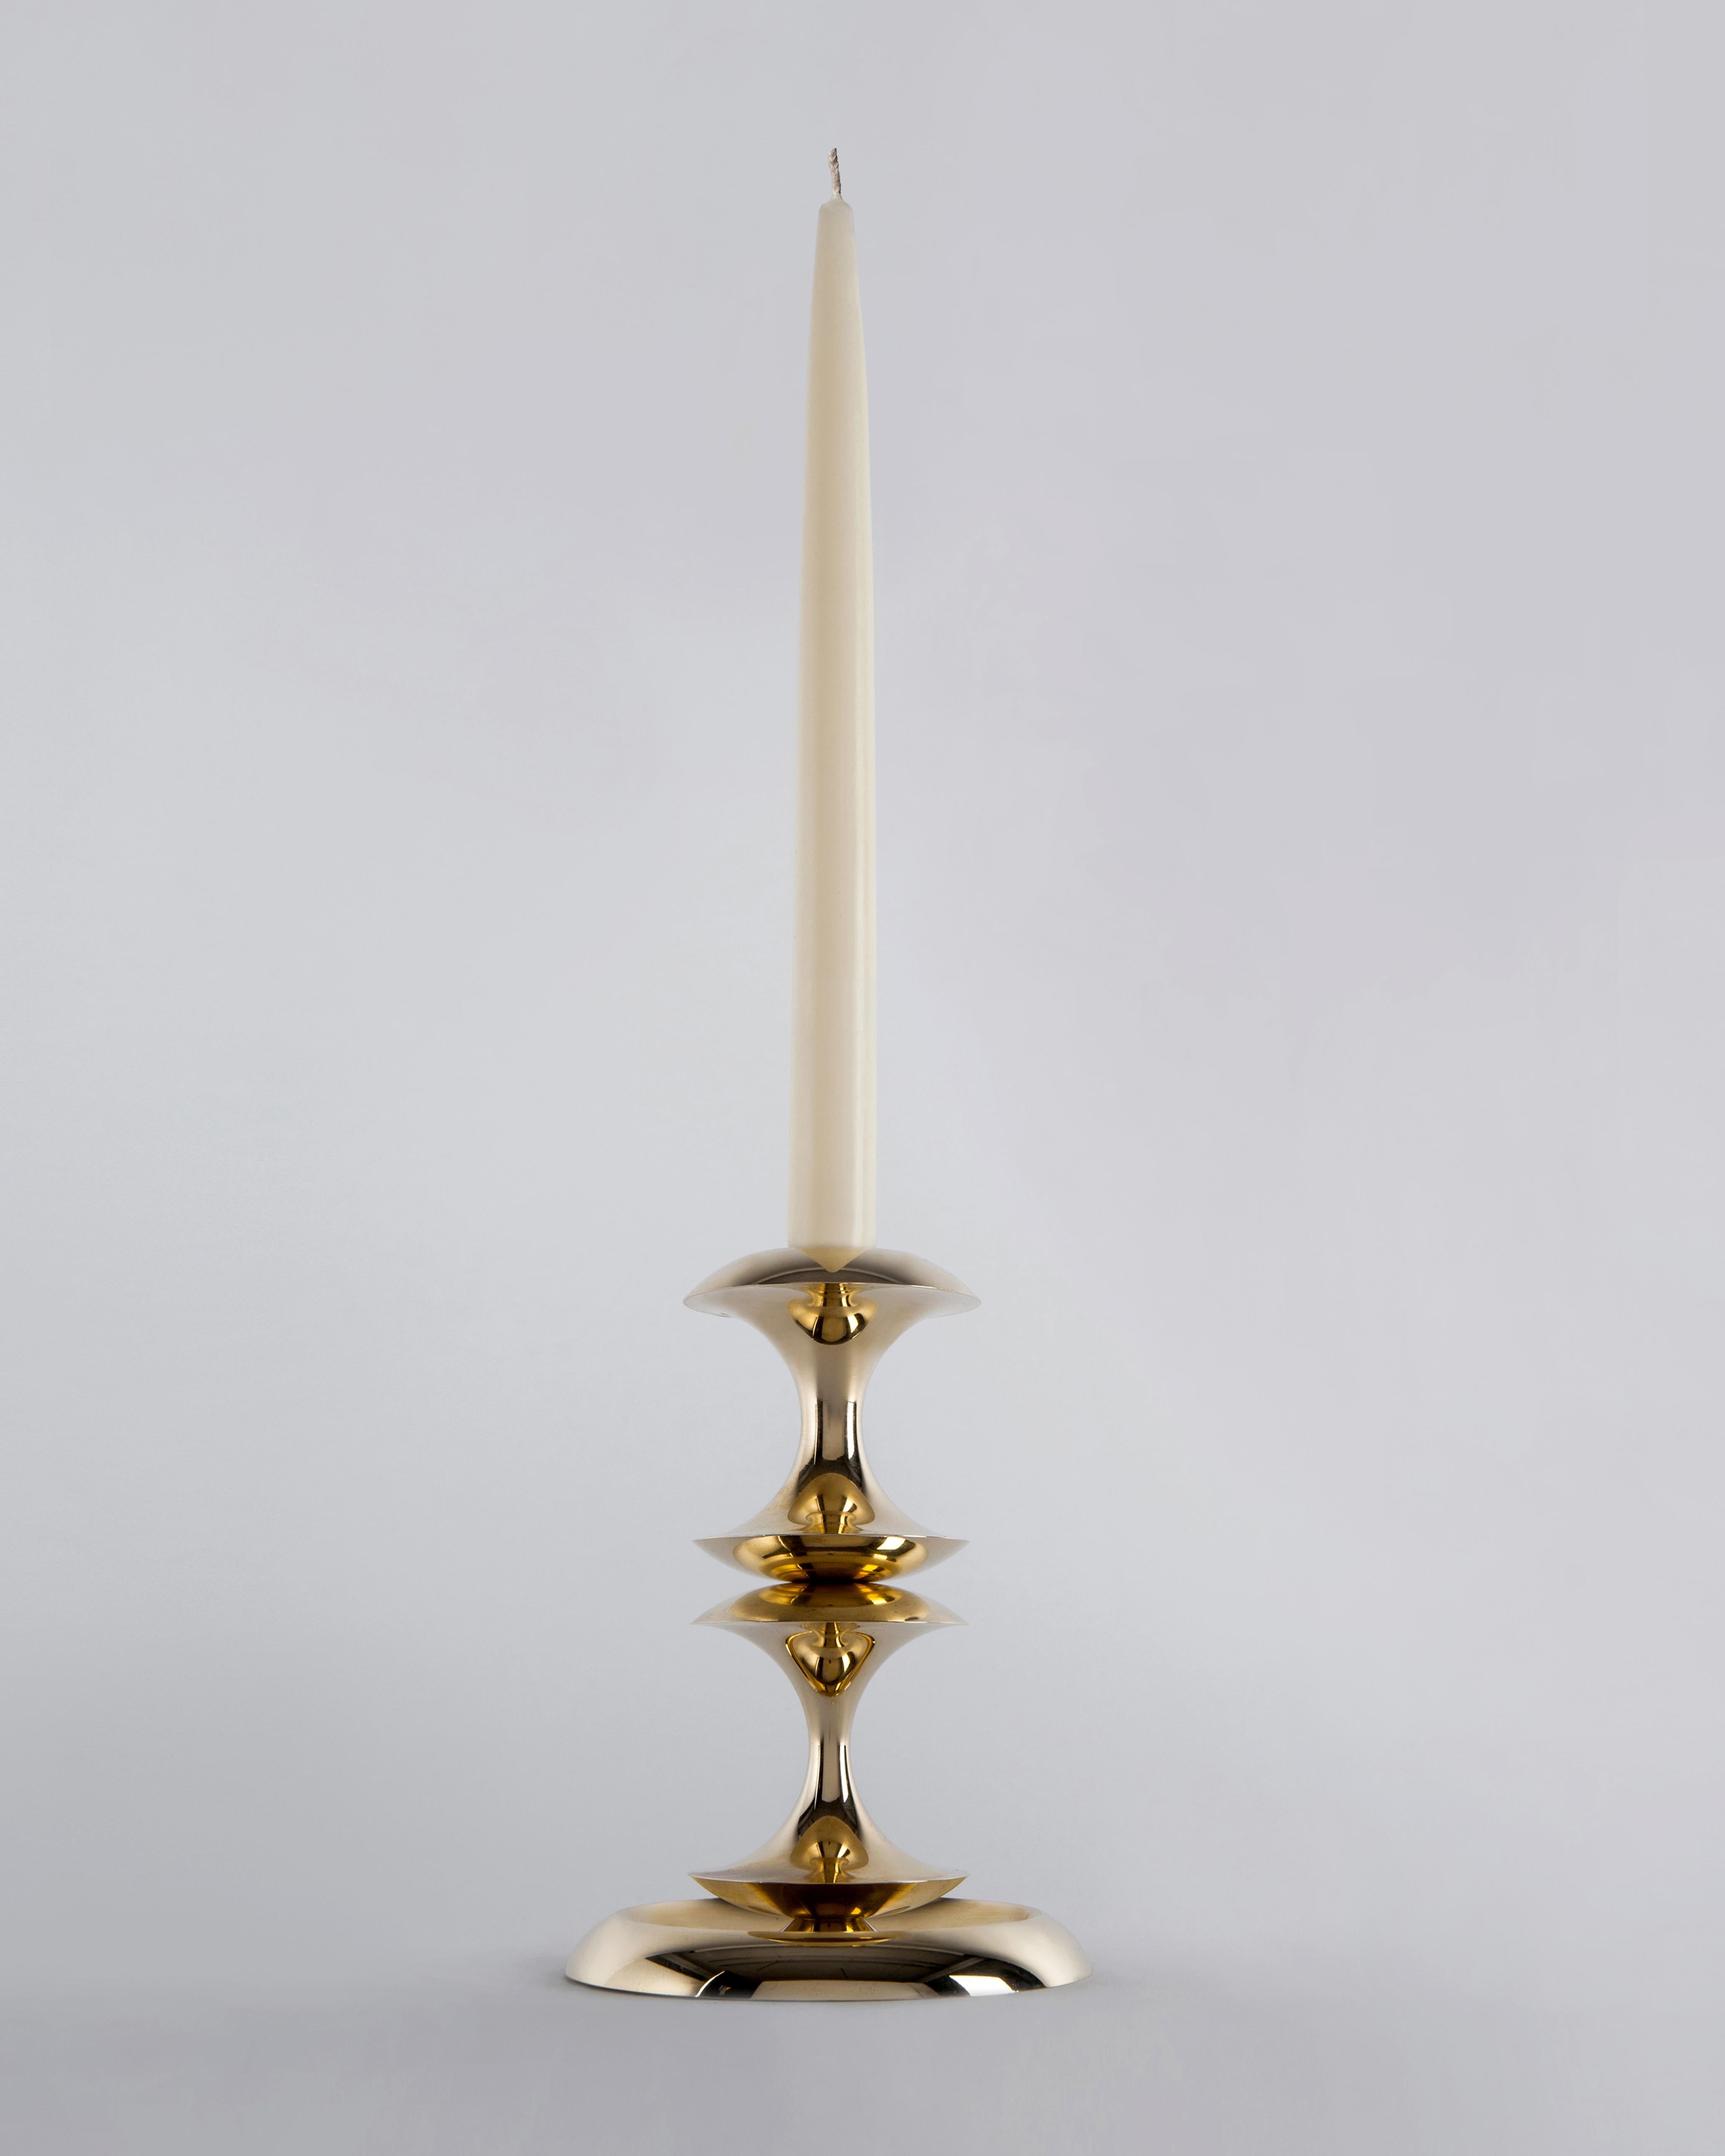 Contemporary Set of Four Stayman Candlesticks in Solid Hand Polished Brass, Remains Lighting